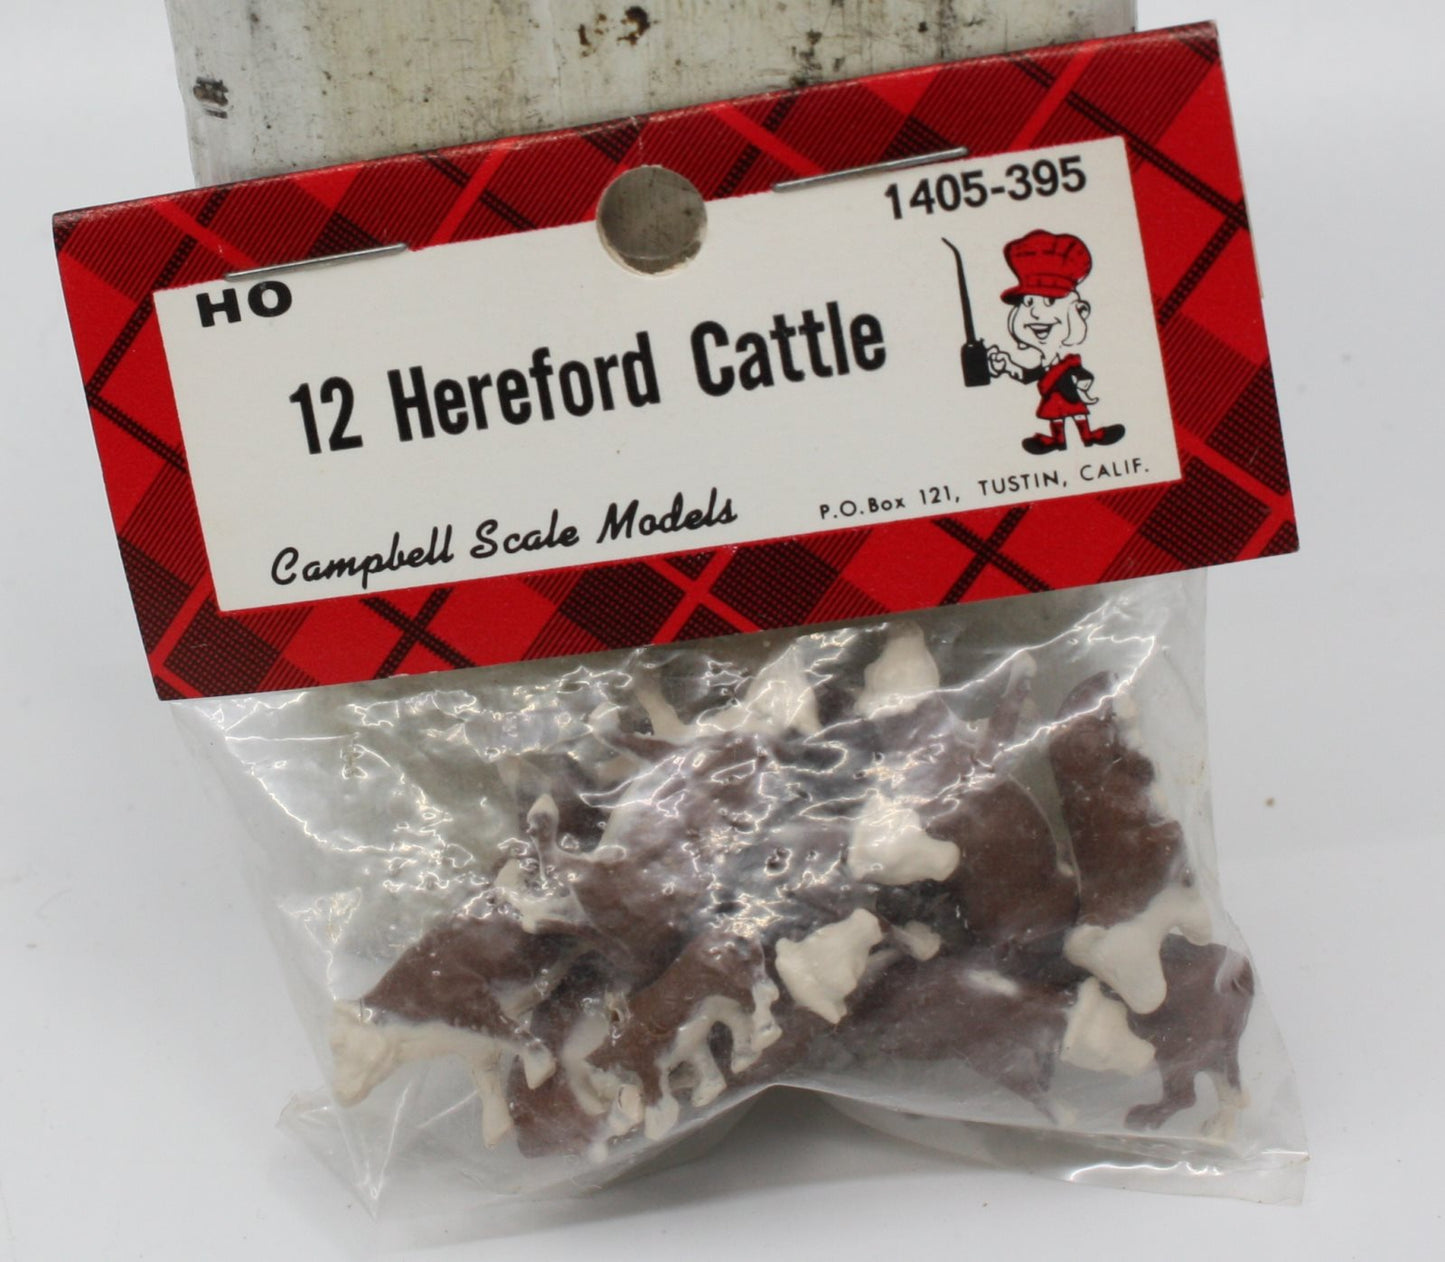 Campbell Scale Models 1405-395 HO Pack of Hereford Cattle (Pack of 12)